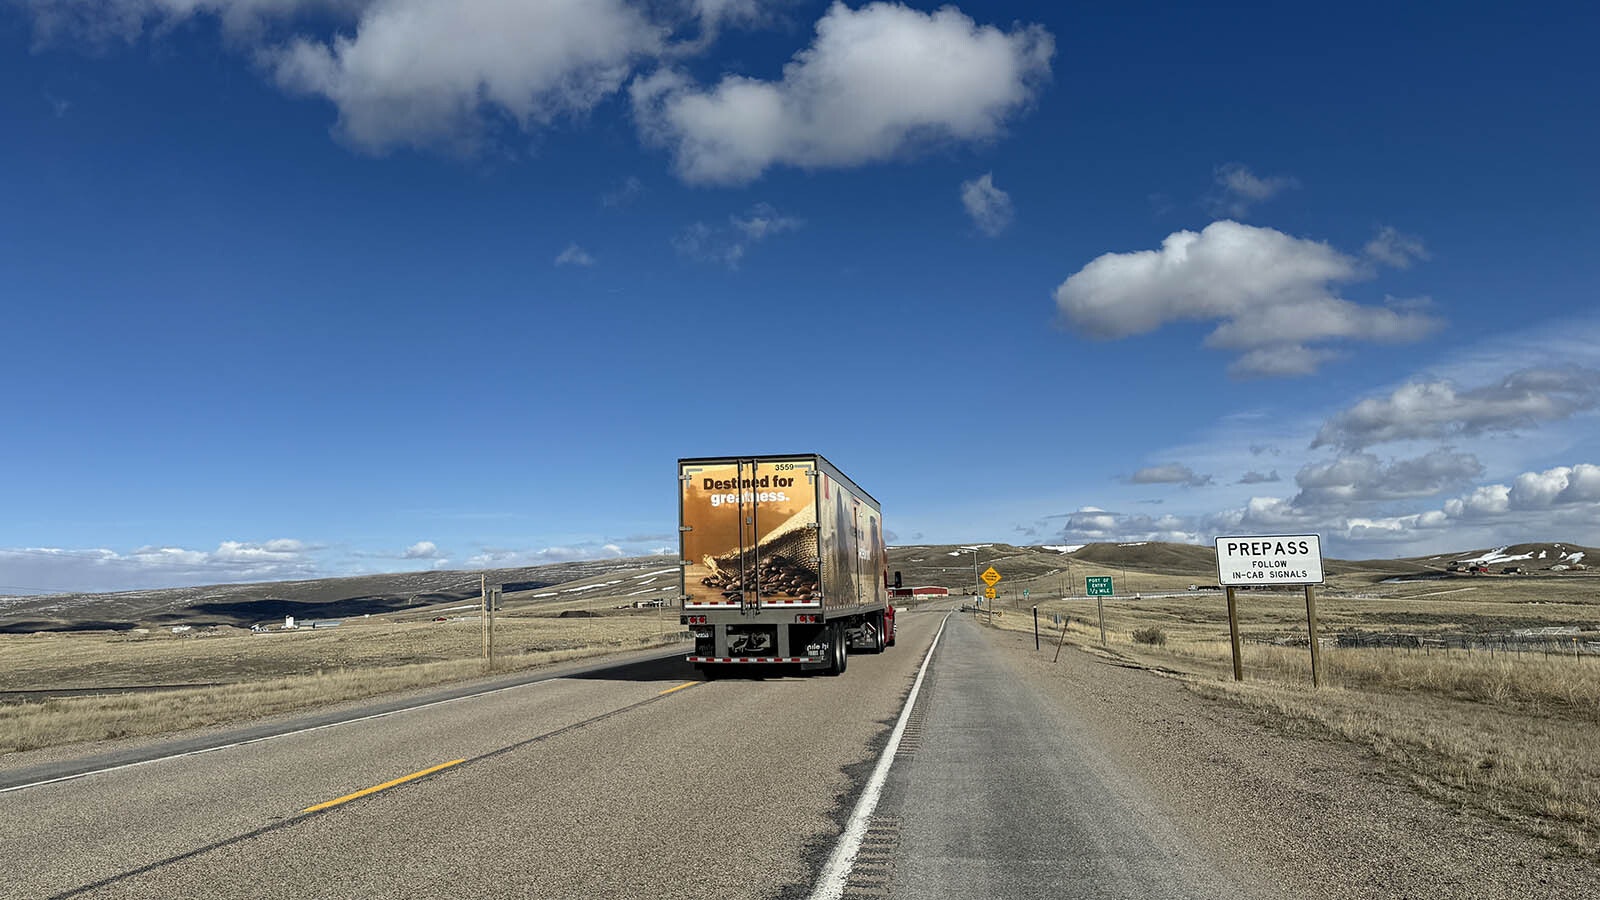 A 2.71-mile stretch of US Highway 30 near the Kemmerer port of entry will be realigned to the north so that a coal mine operator can access more than 9 million tons of coal reserves.  The road will be moved to the left of the truck that is heading toward the port of entry.